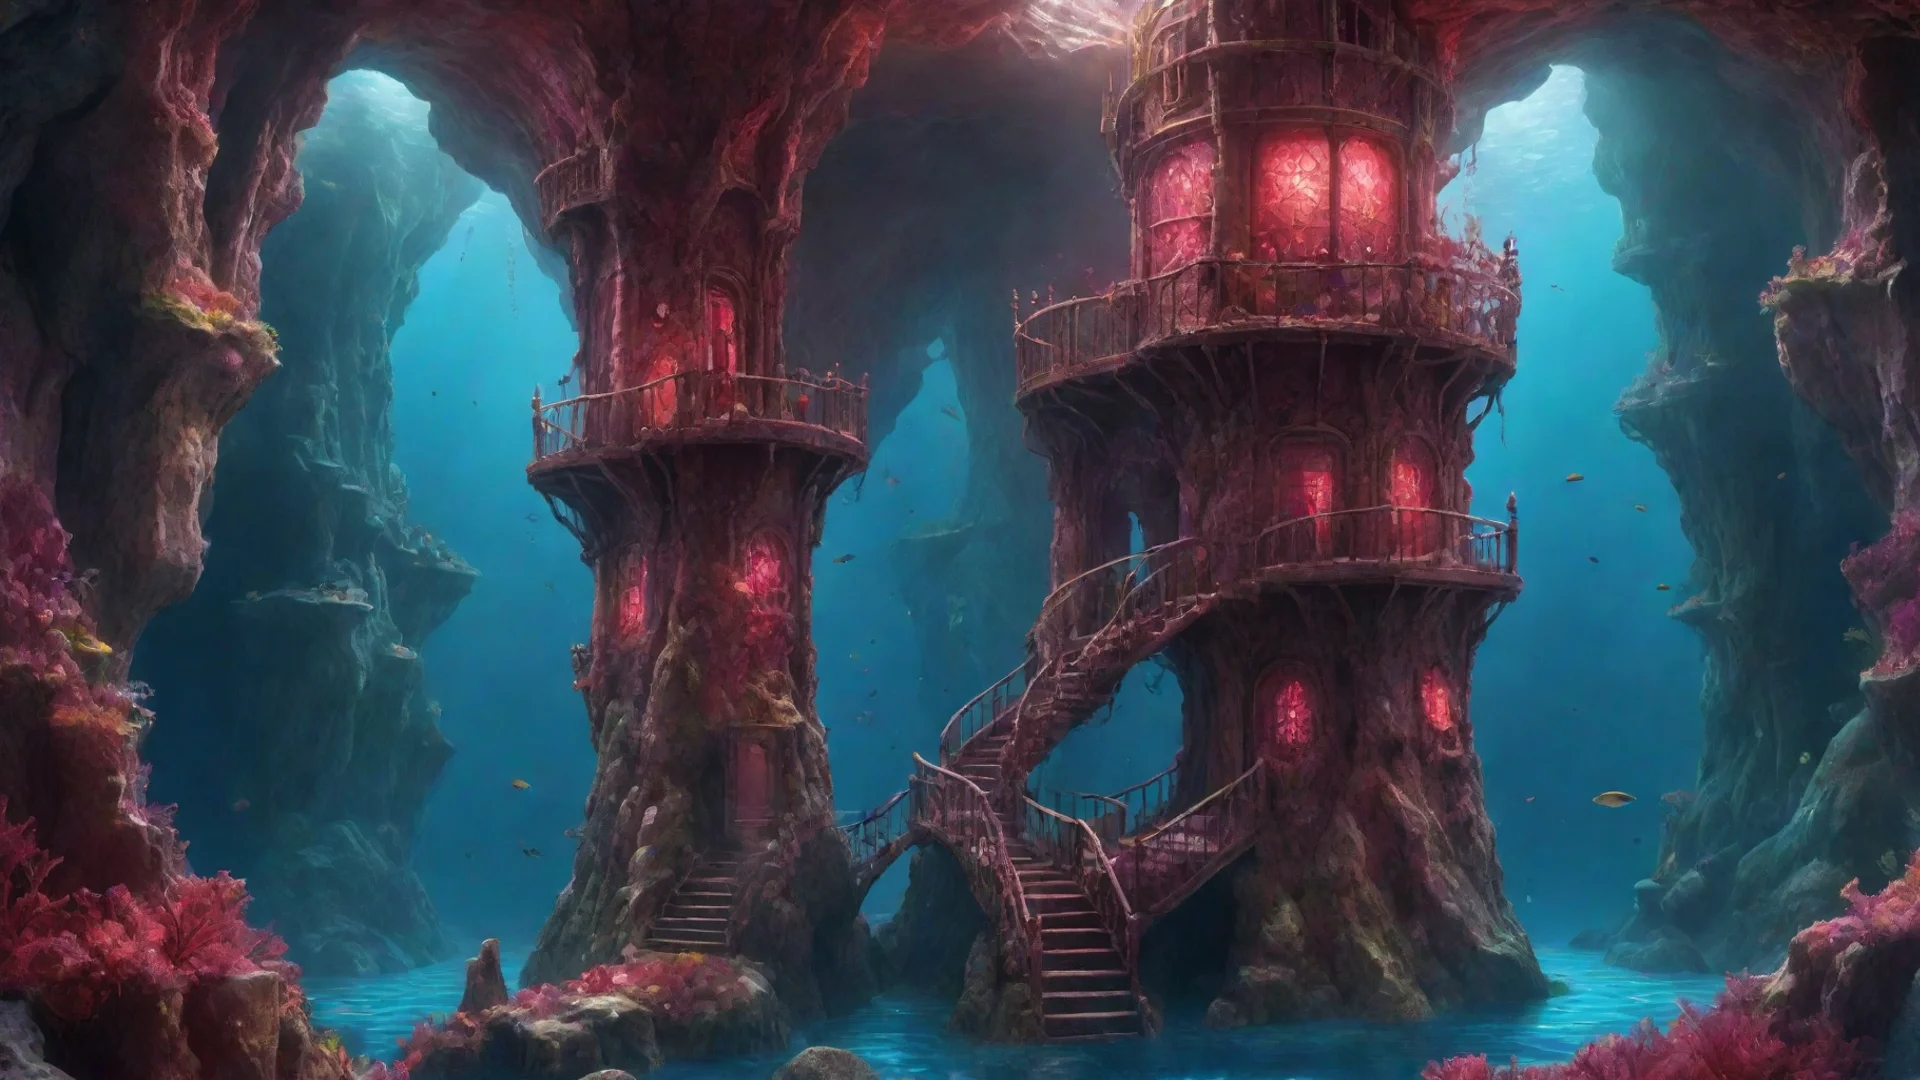 amazing magnificent fantasy watch tower inside ruby crystal in an undersea subterranean landscape highly detailed intricate octa awesome portrait 2 wide